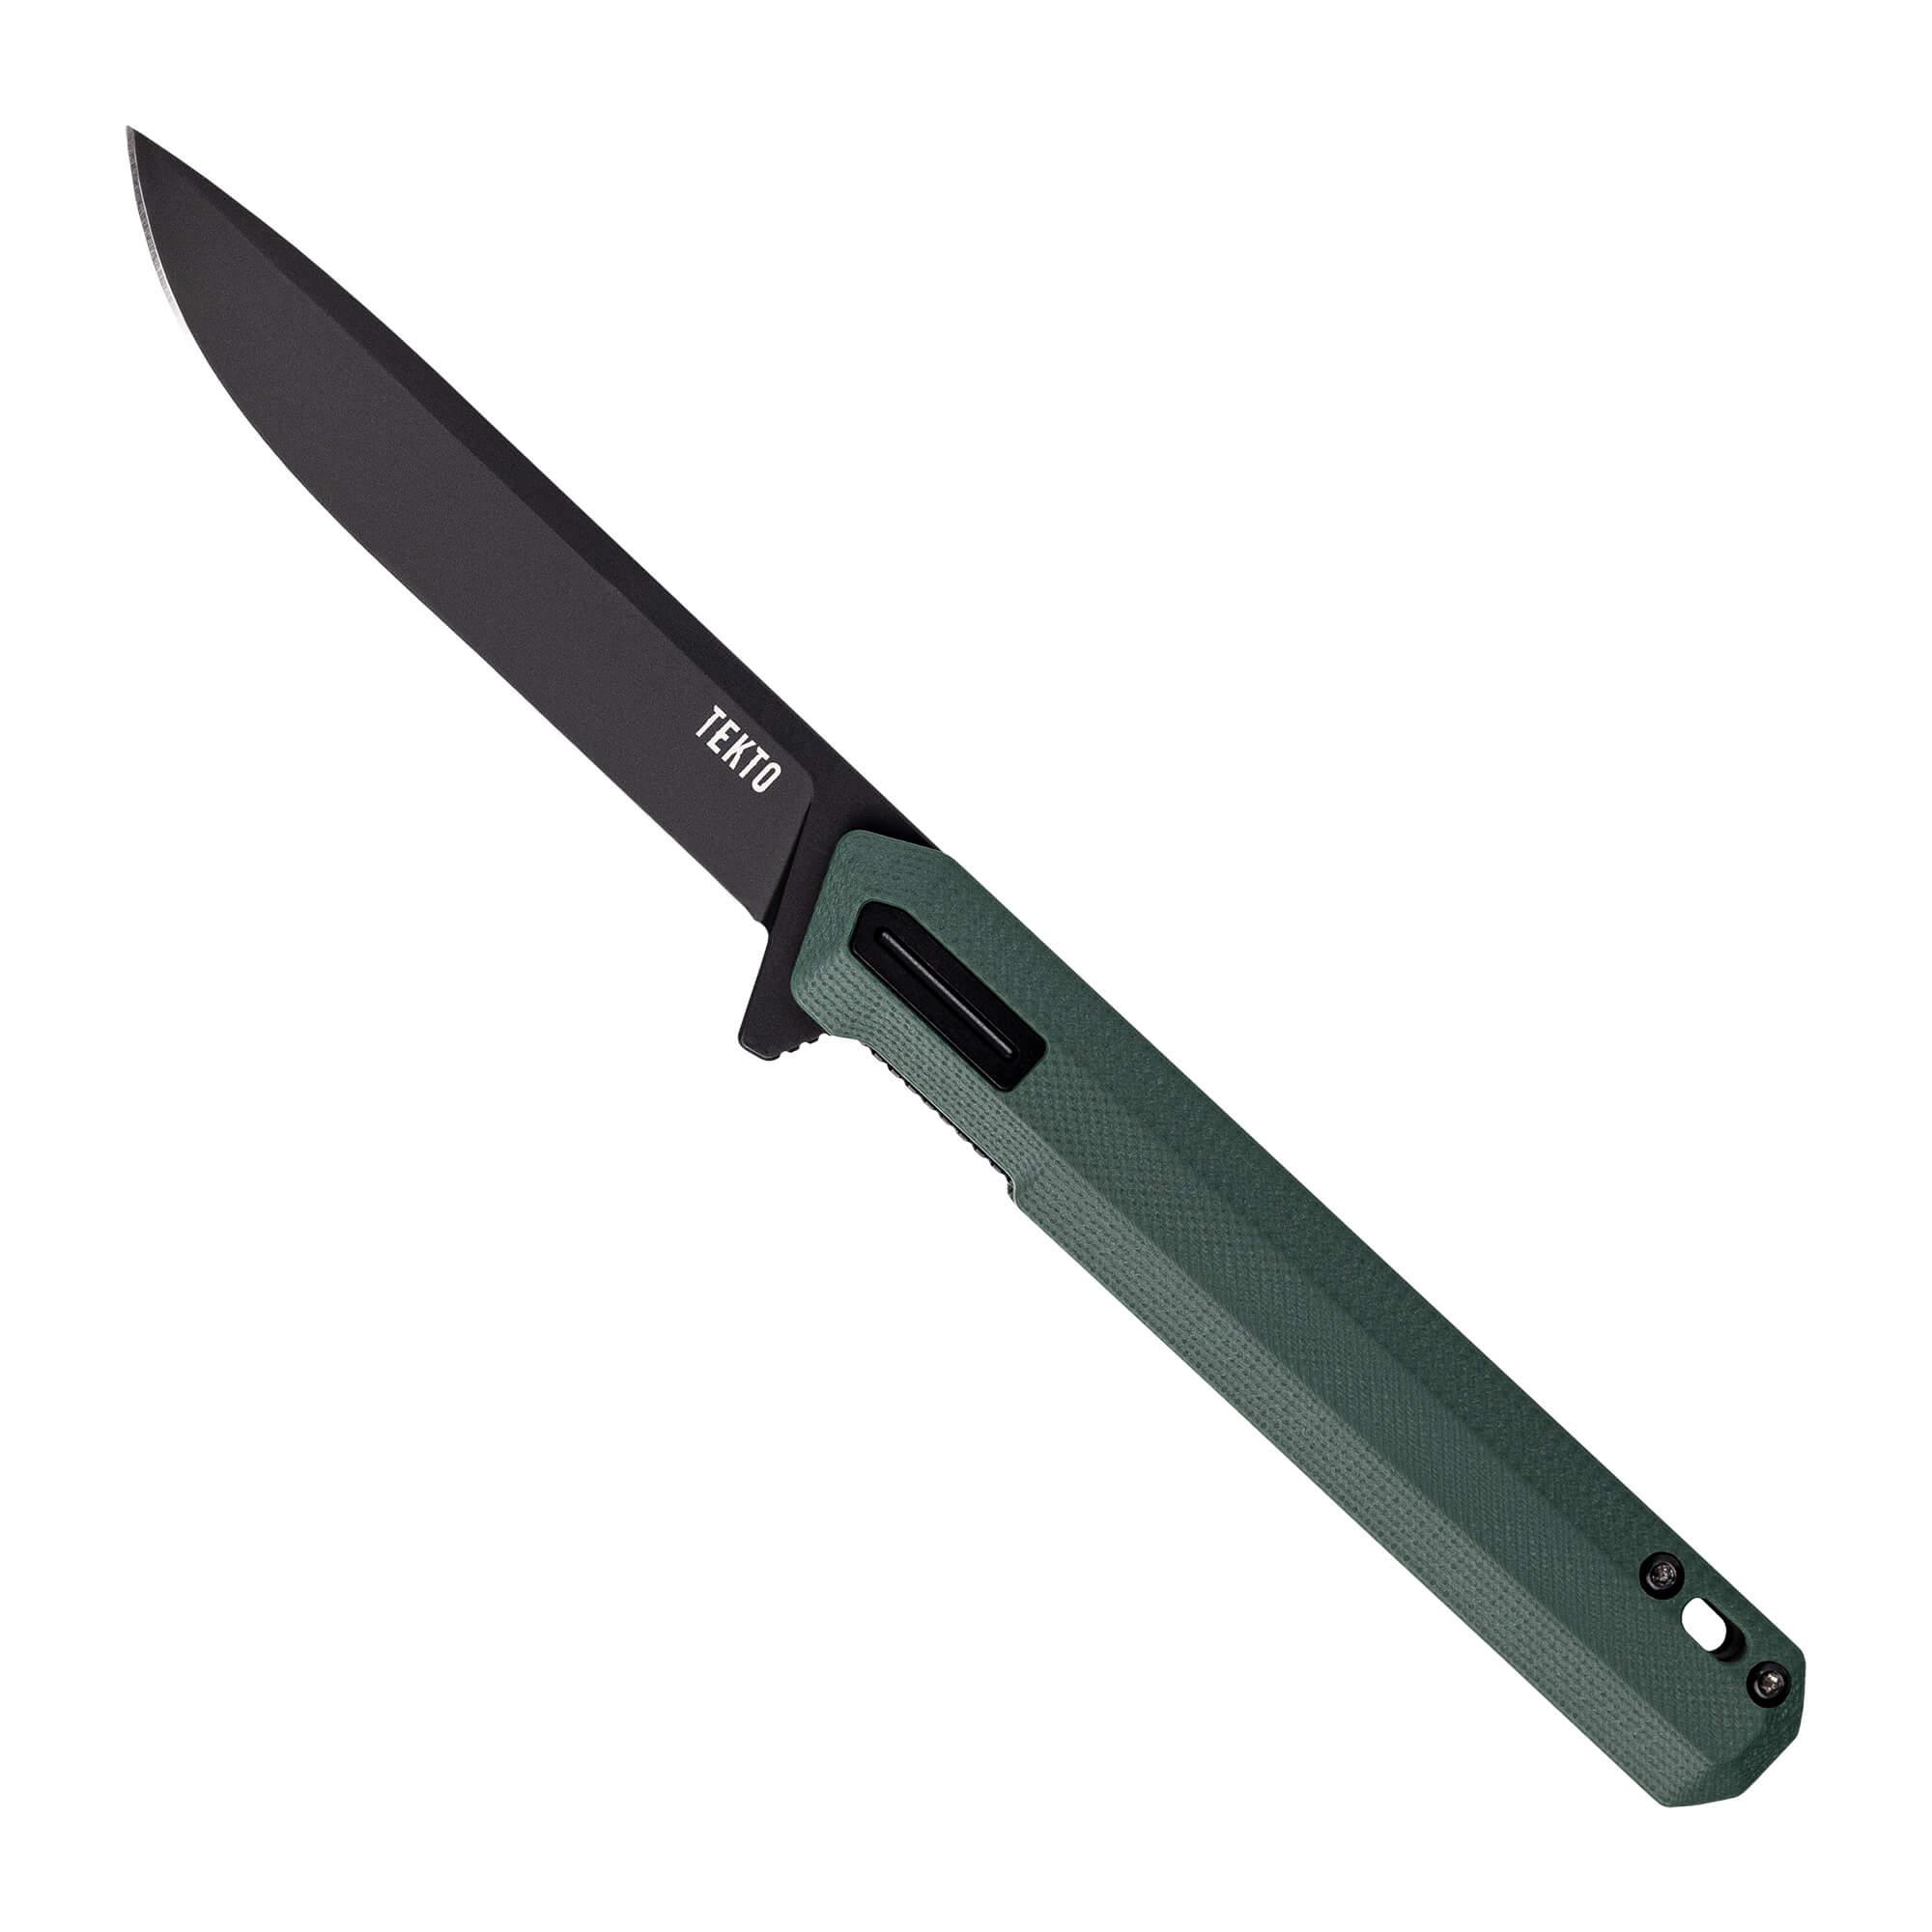 F2 Bravo - Green G10 // Black Accents - Purpose-Built / Home of the Trades